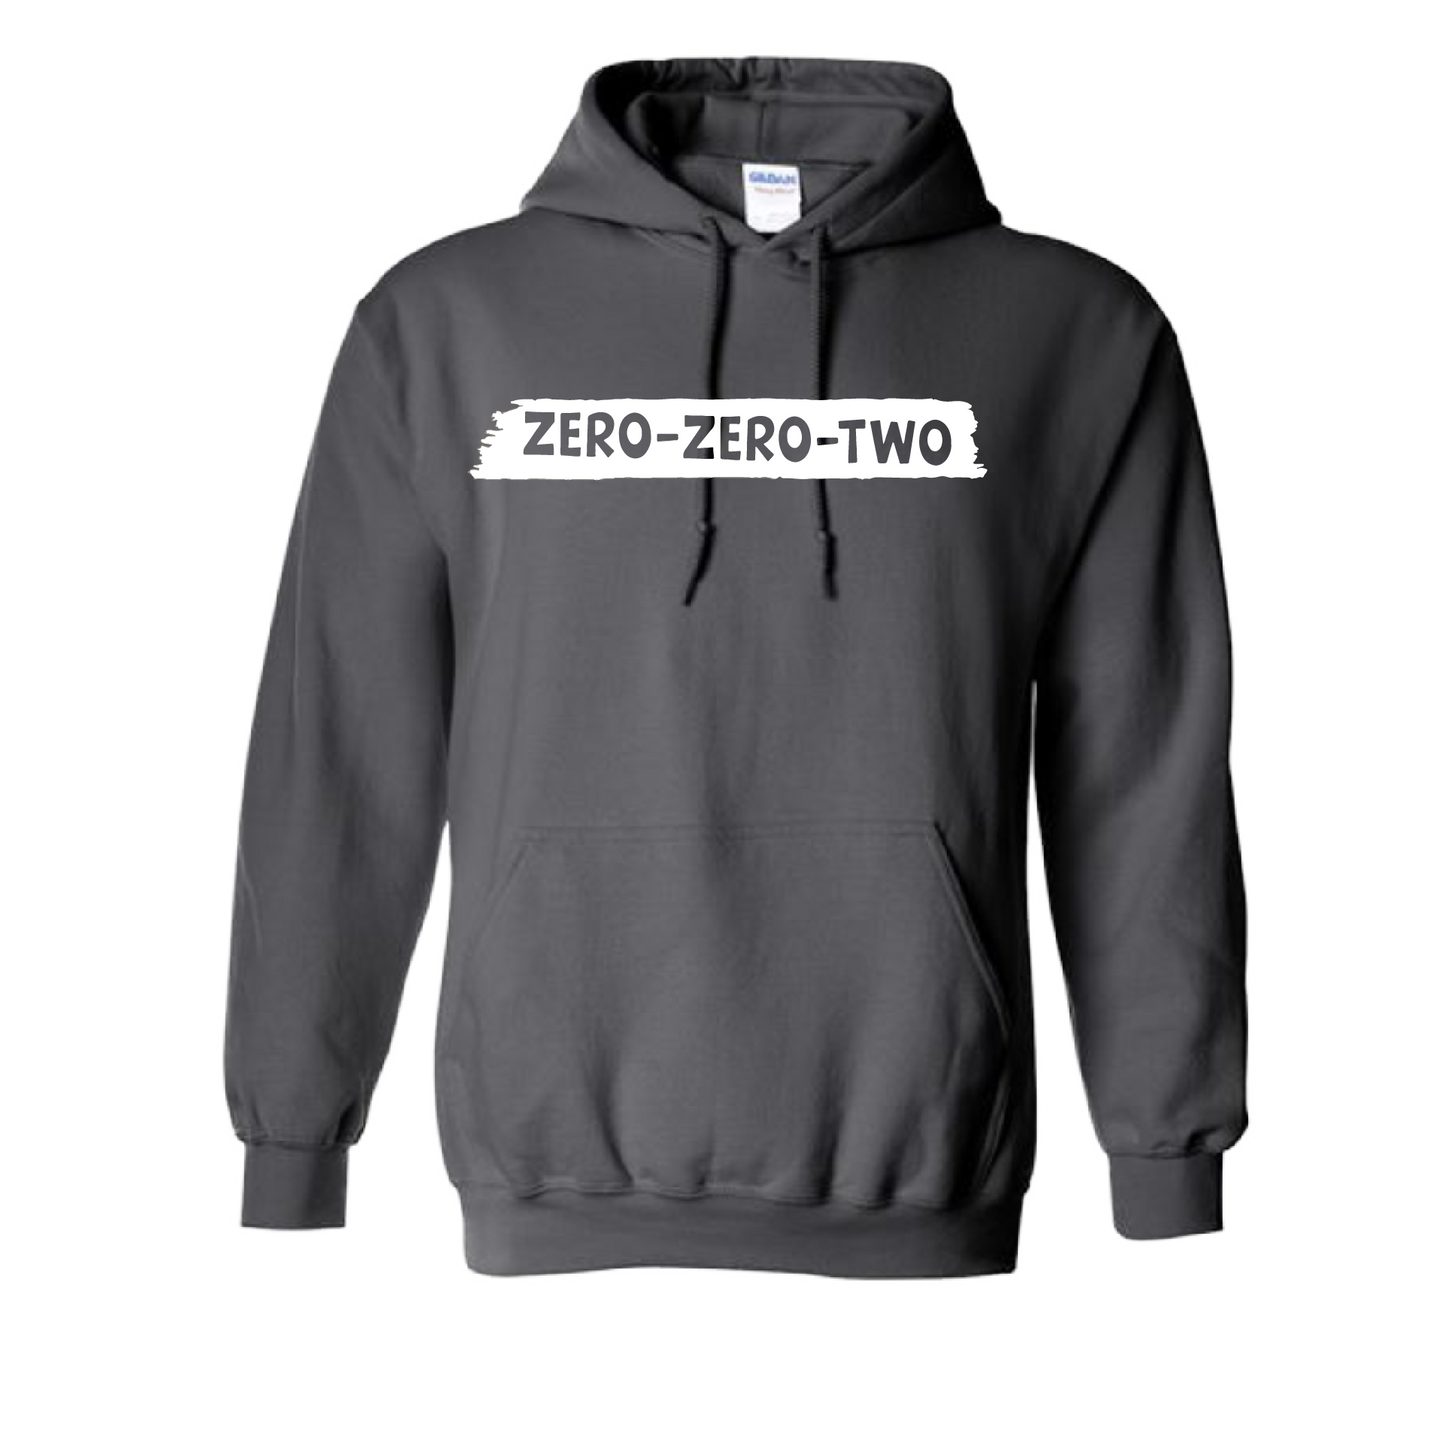 Pickleball Design: Zero Zero Two  Unisex Hooded Sweatshirt: Moisture-wicking, double-lined hood, front pouch pocket.  This unisex hooded sweatshirt is ultra comfortable and soft. Stay warm on the Pickleball courts while being that hit with this one of kind design.